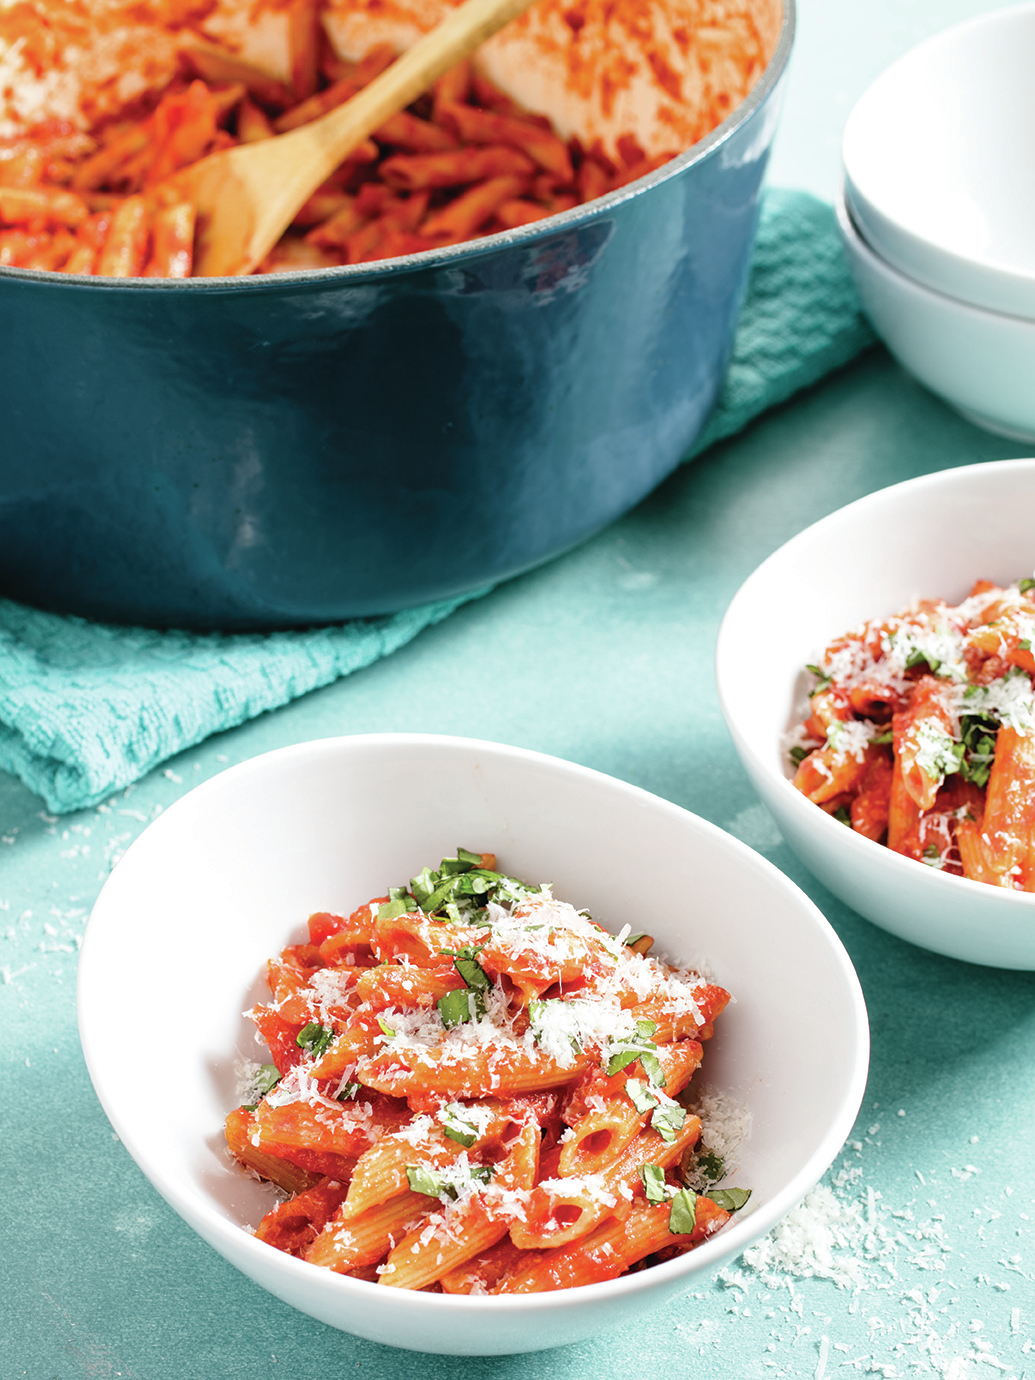 America's Test Kitchen has released a new cookbook for young chefs containing easy-to-make, kid-friendly recipes, like this one-pot pasta.